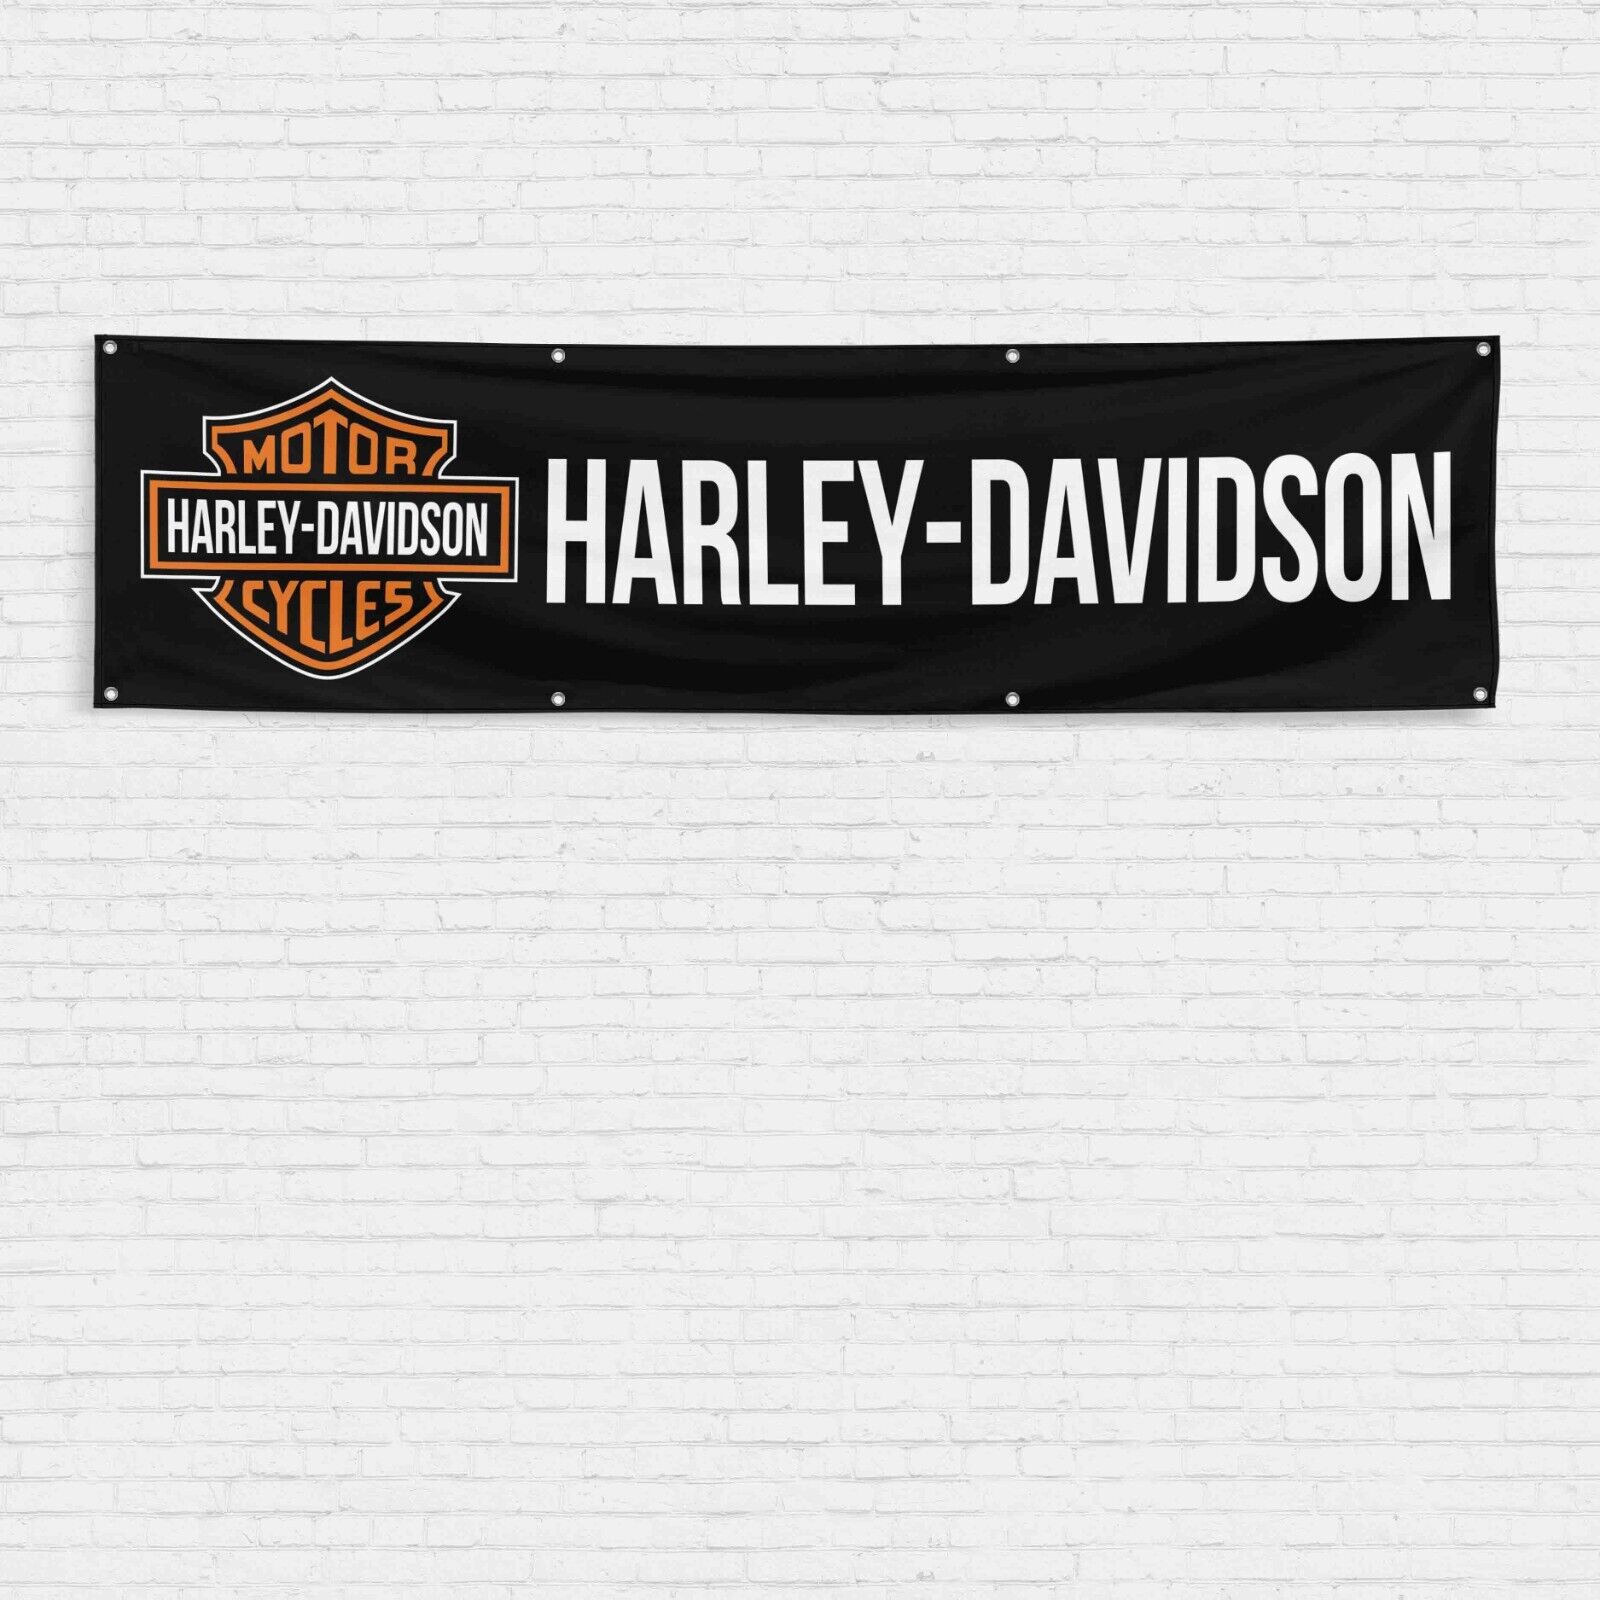 For Harley Davidson Motorcycle Enthusiasts 2x8 ft Flag Garden Garage Wall Banner